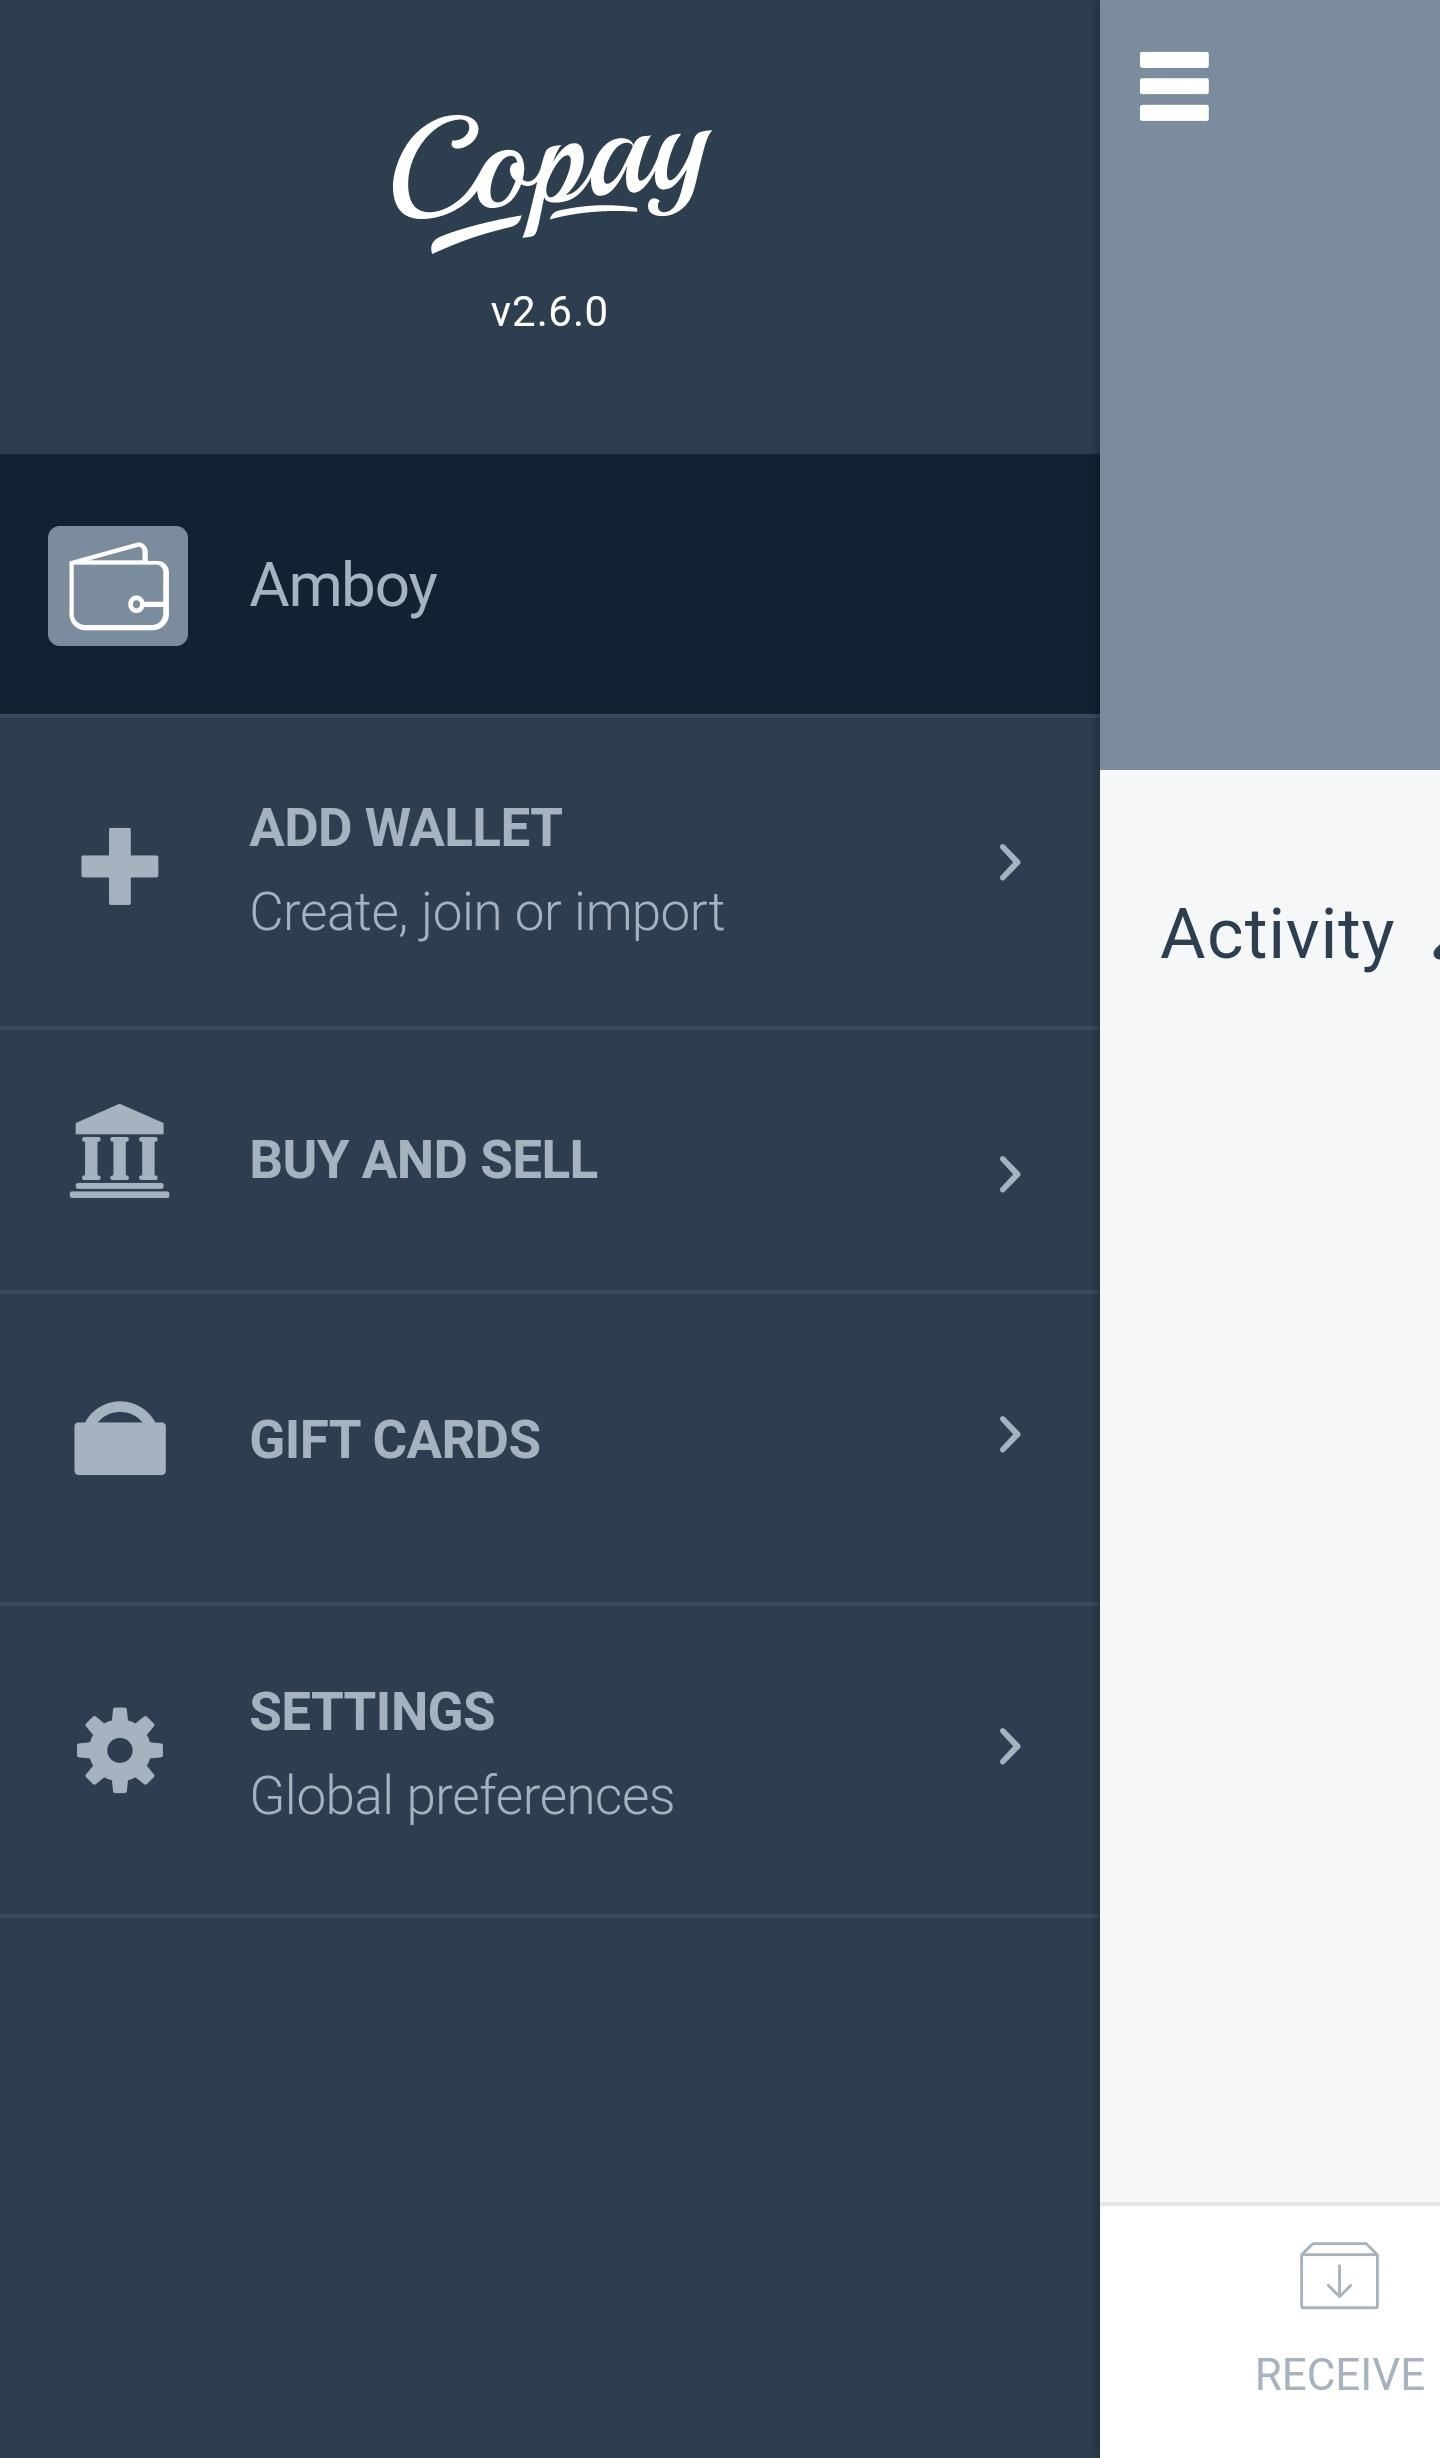 The Best Bitcoin Wallet Apps for Your Android Device